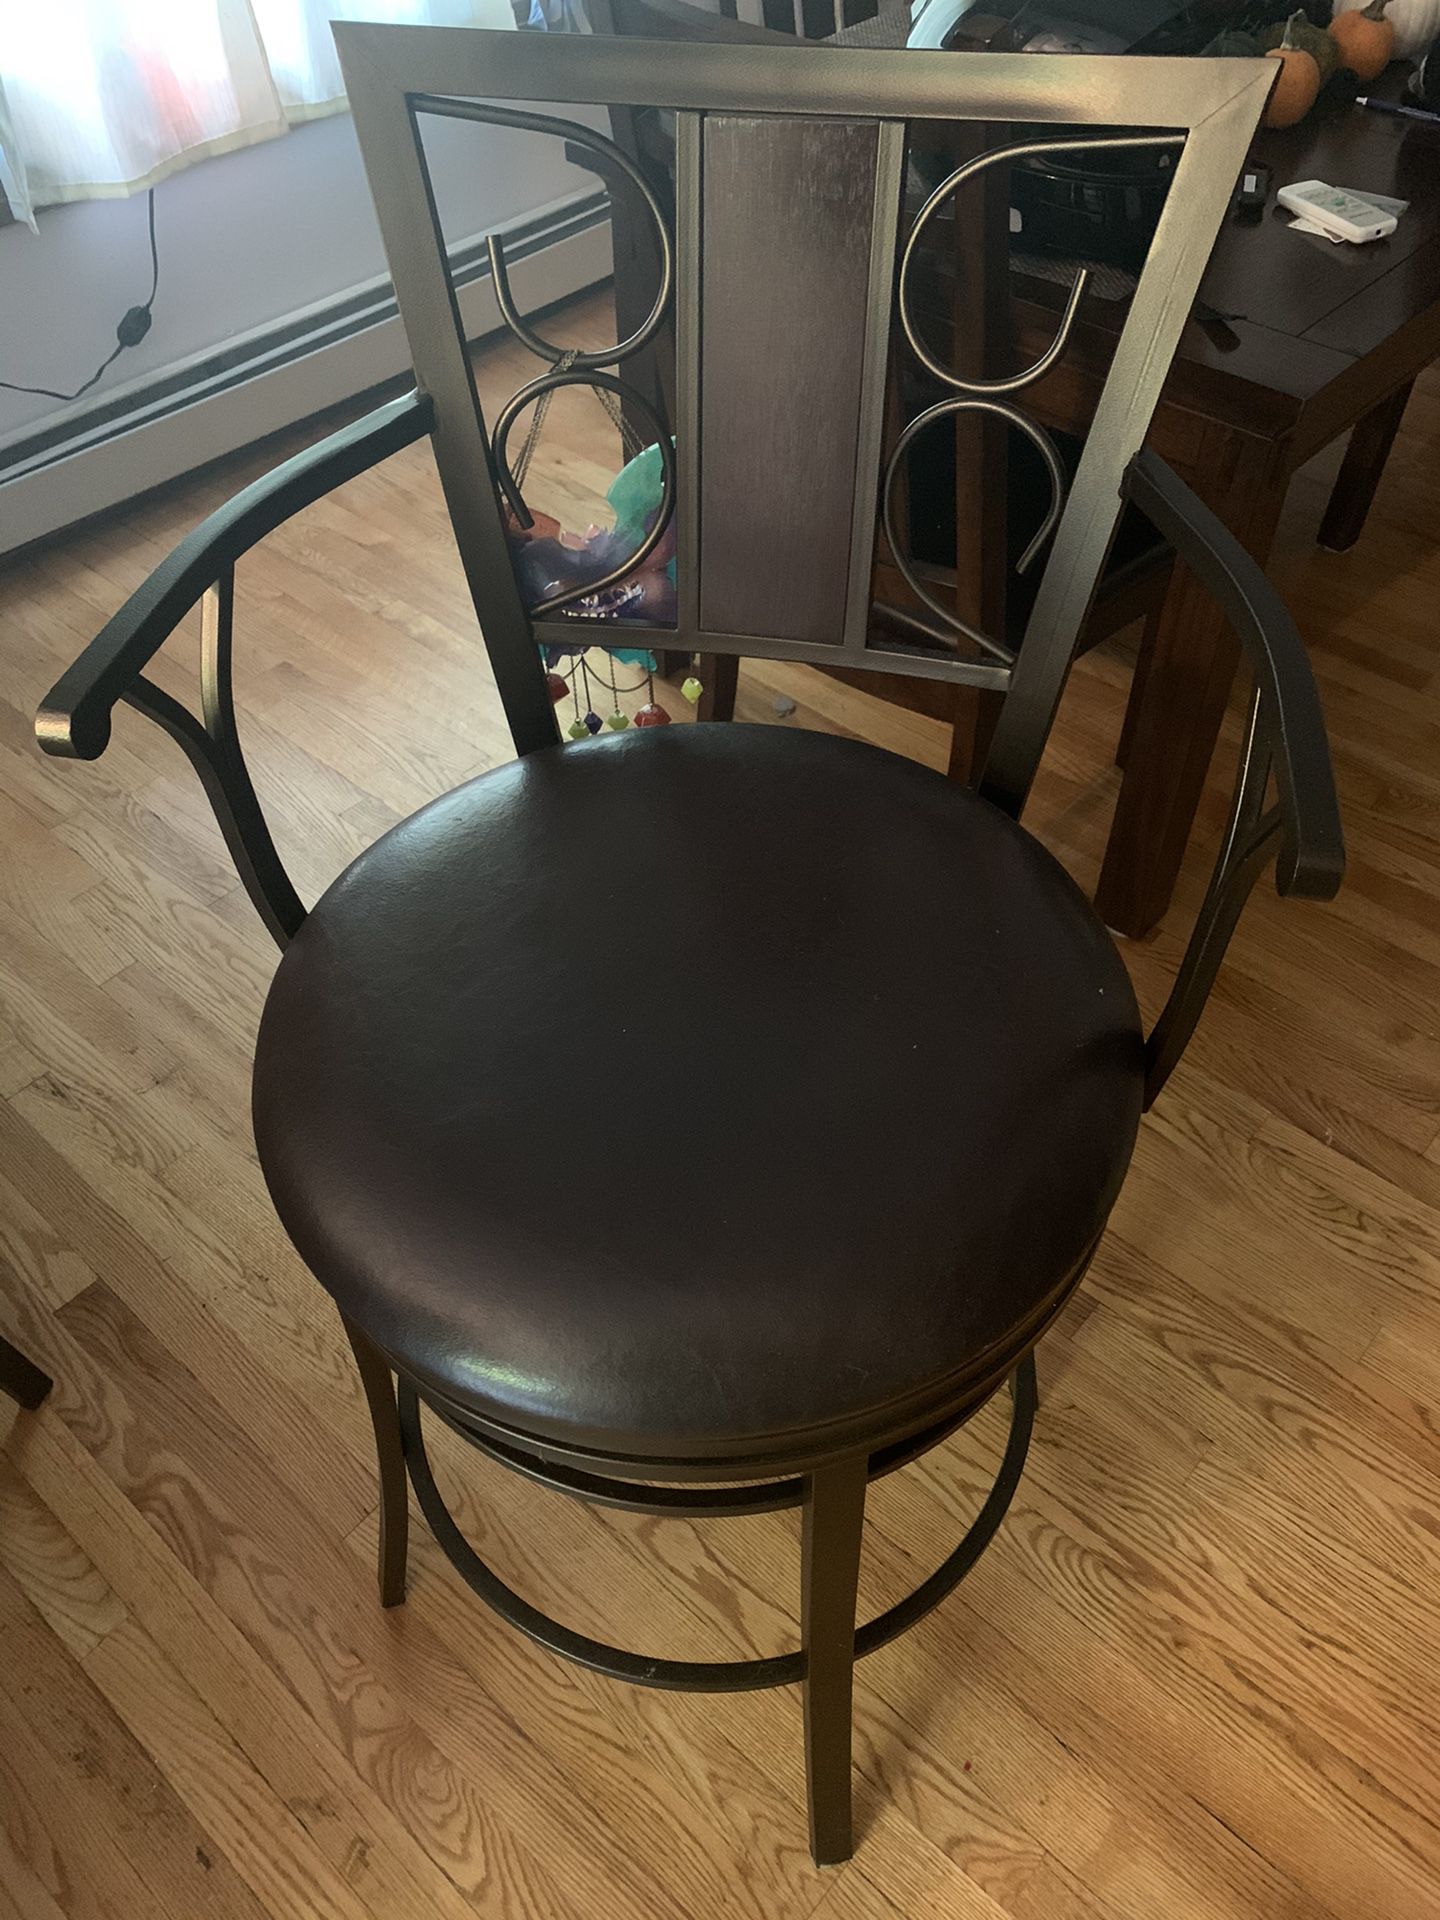 (2) (TWO CHAIRS) Bar/breakfast nook bar chairs 29inch tall back